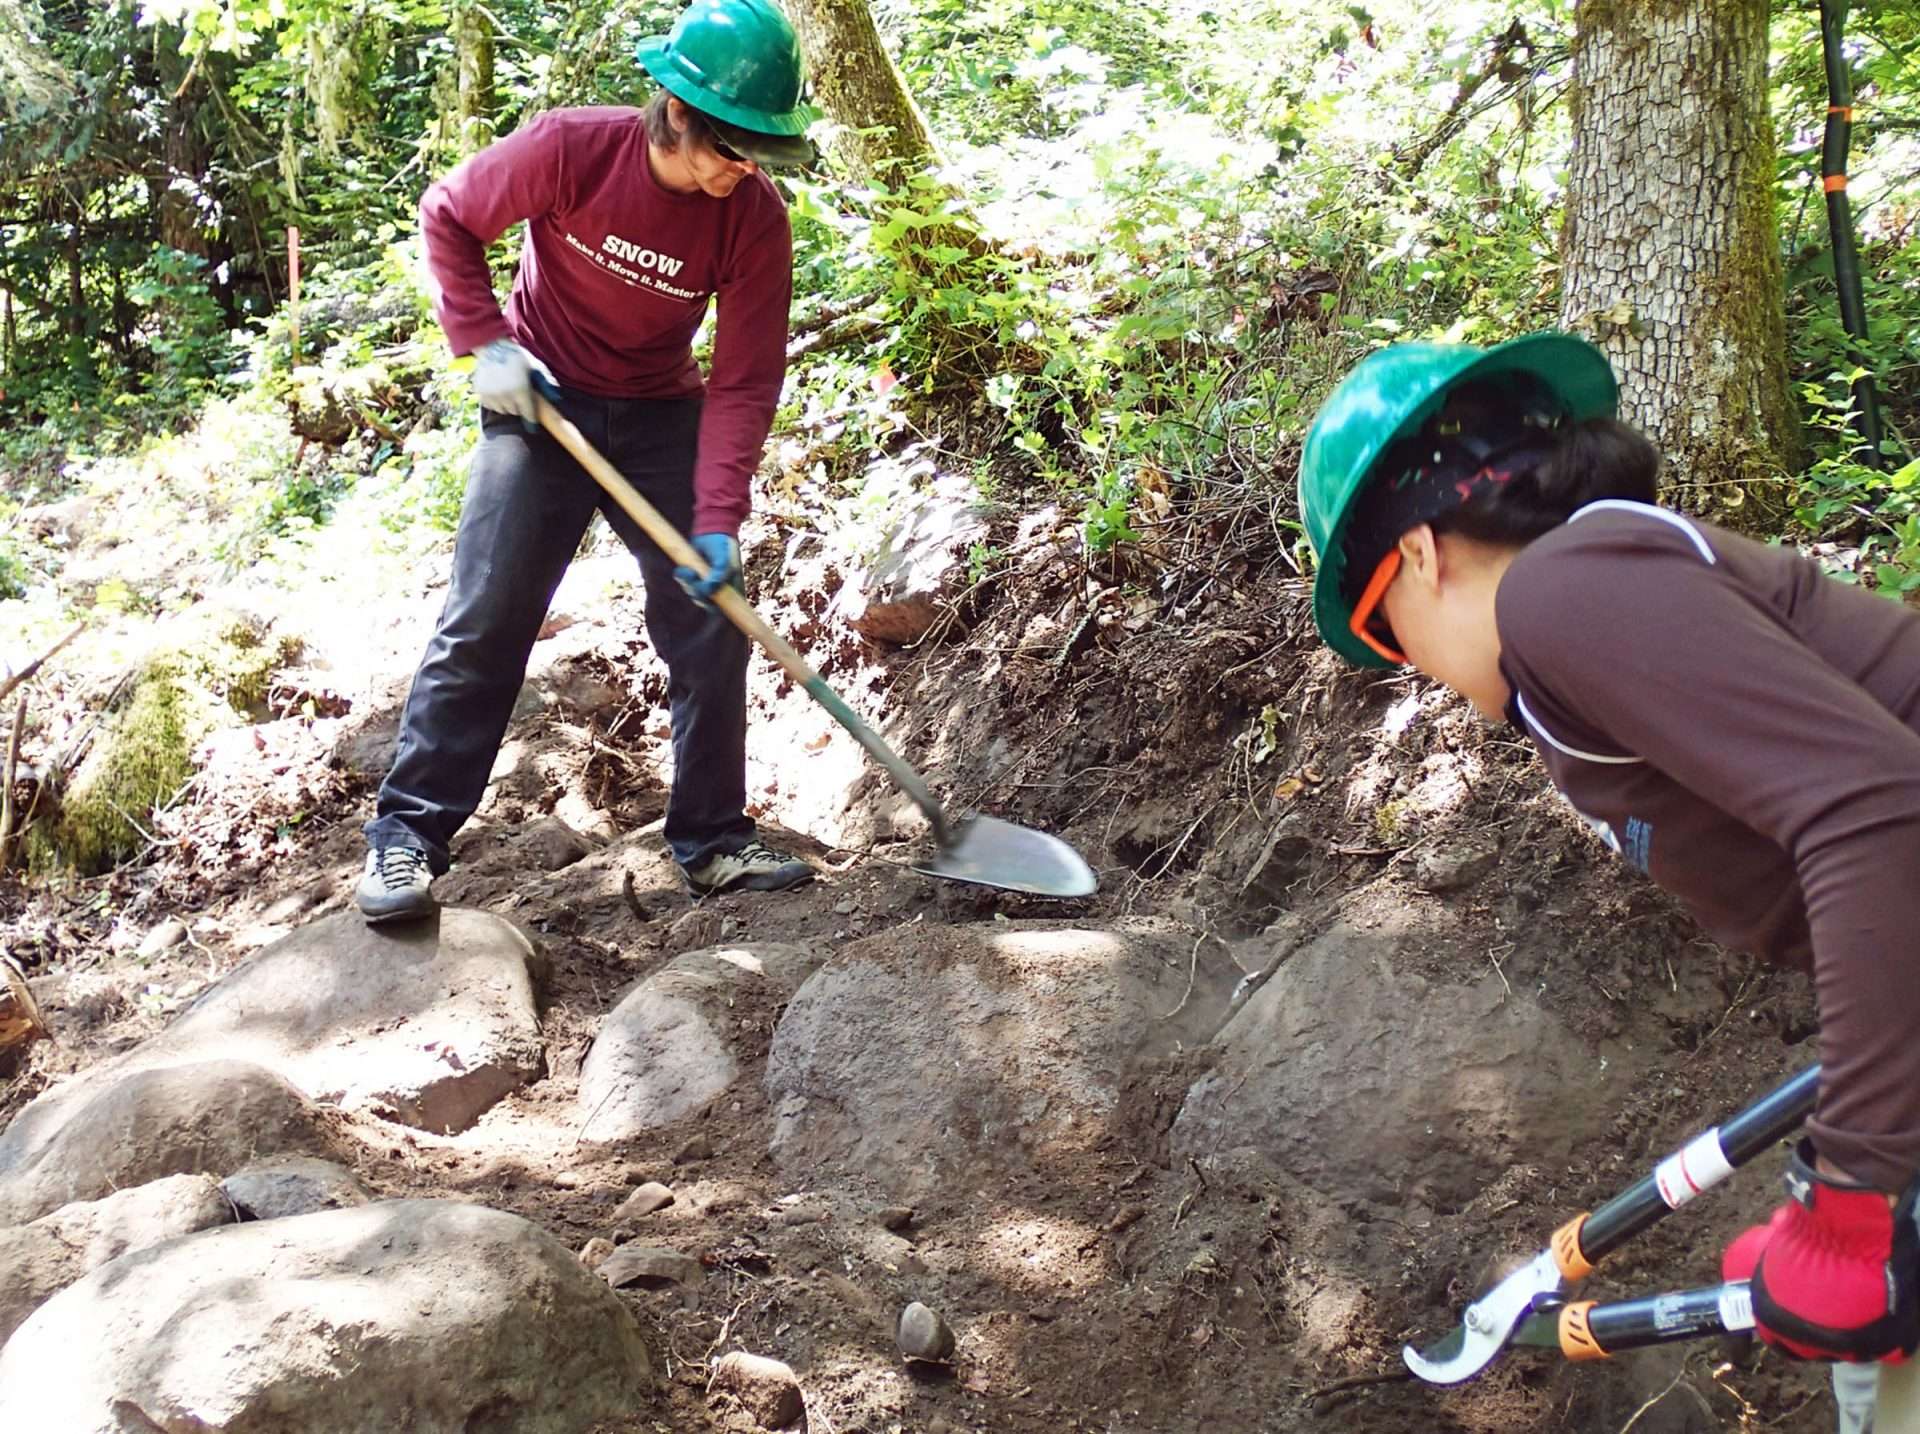 Two workers, one with a shovel and one with loppers, working on a section of trail that has more boulders than dirt.